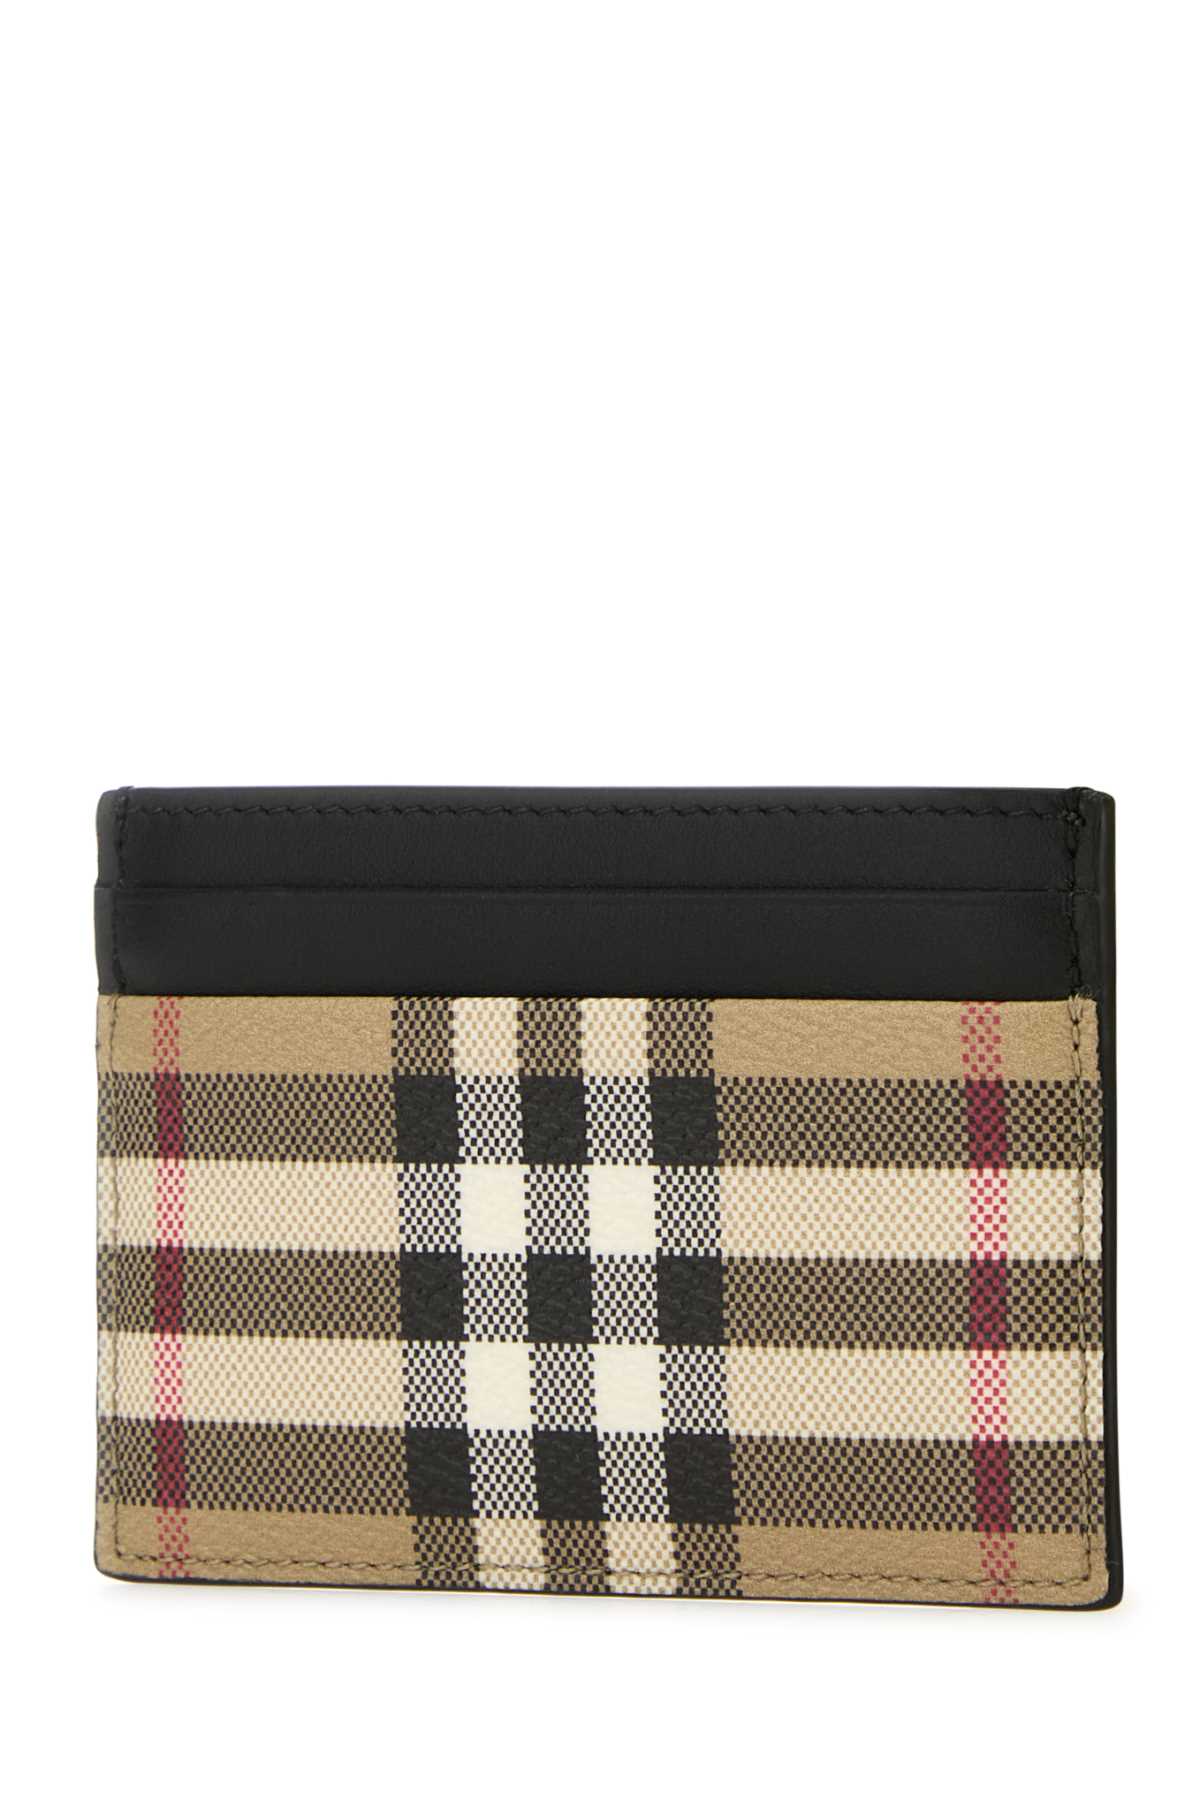 Burberry Printed Canvas Card Holder In Archivebeige